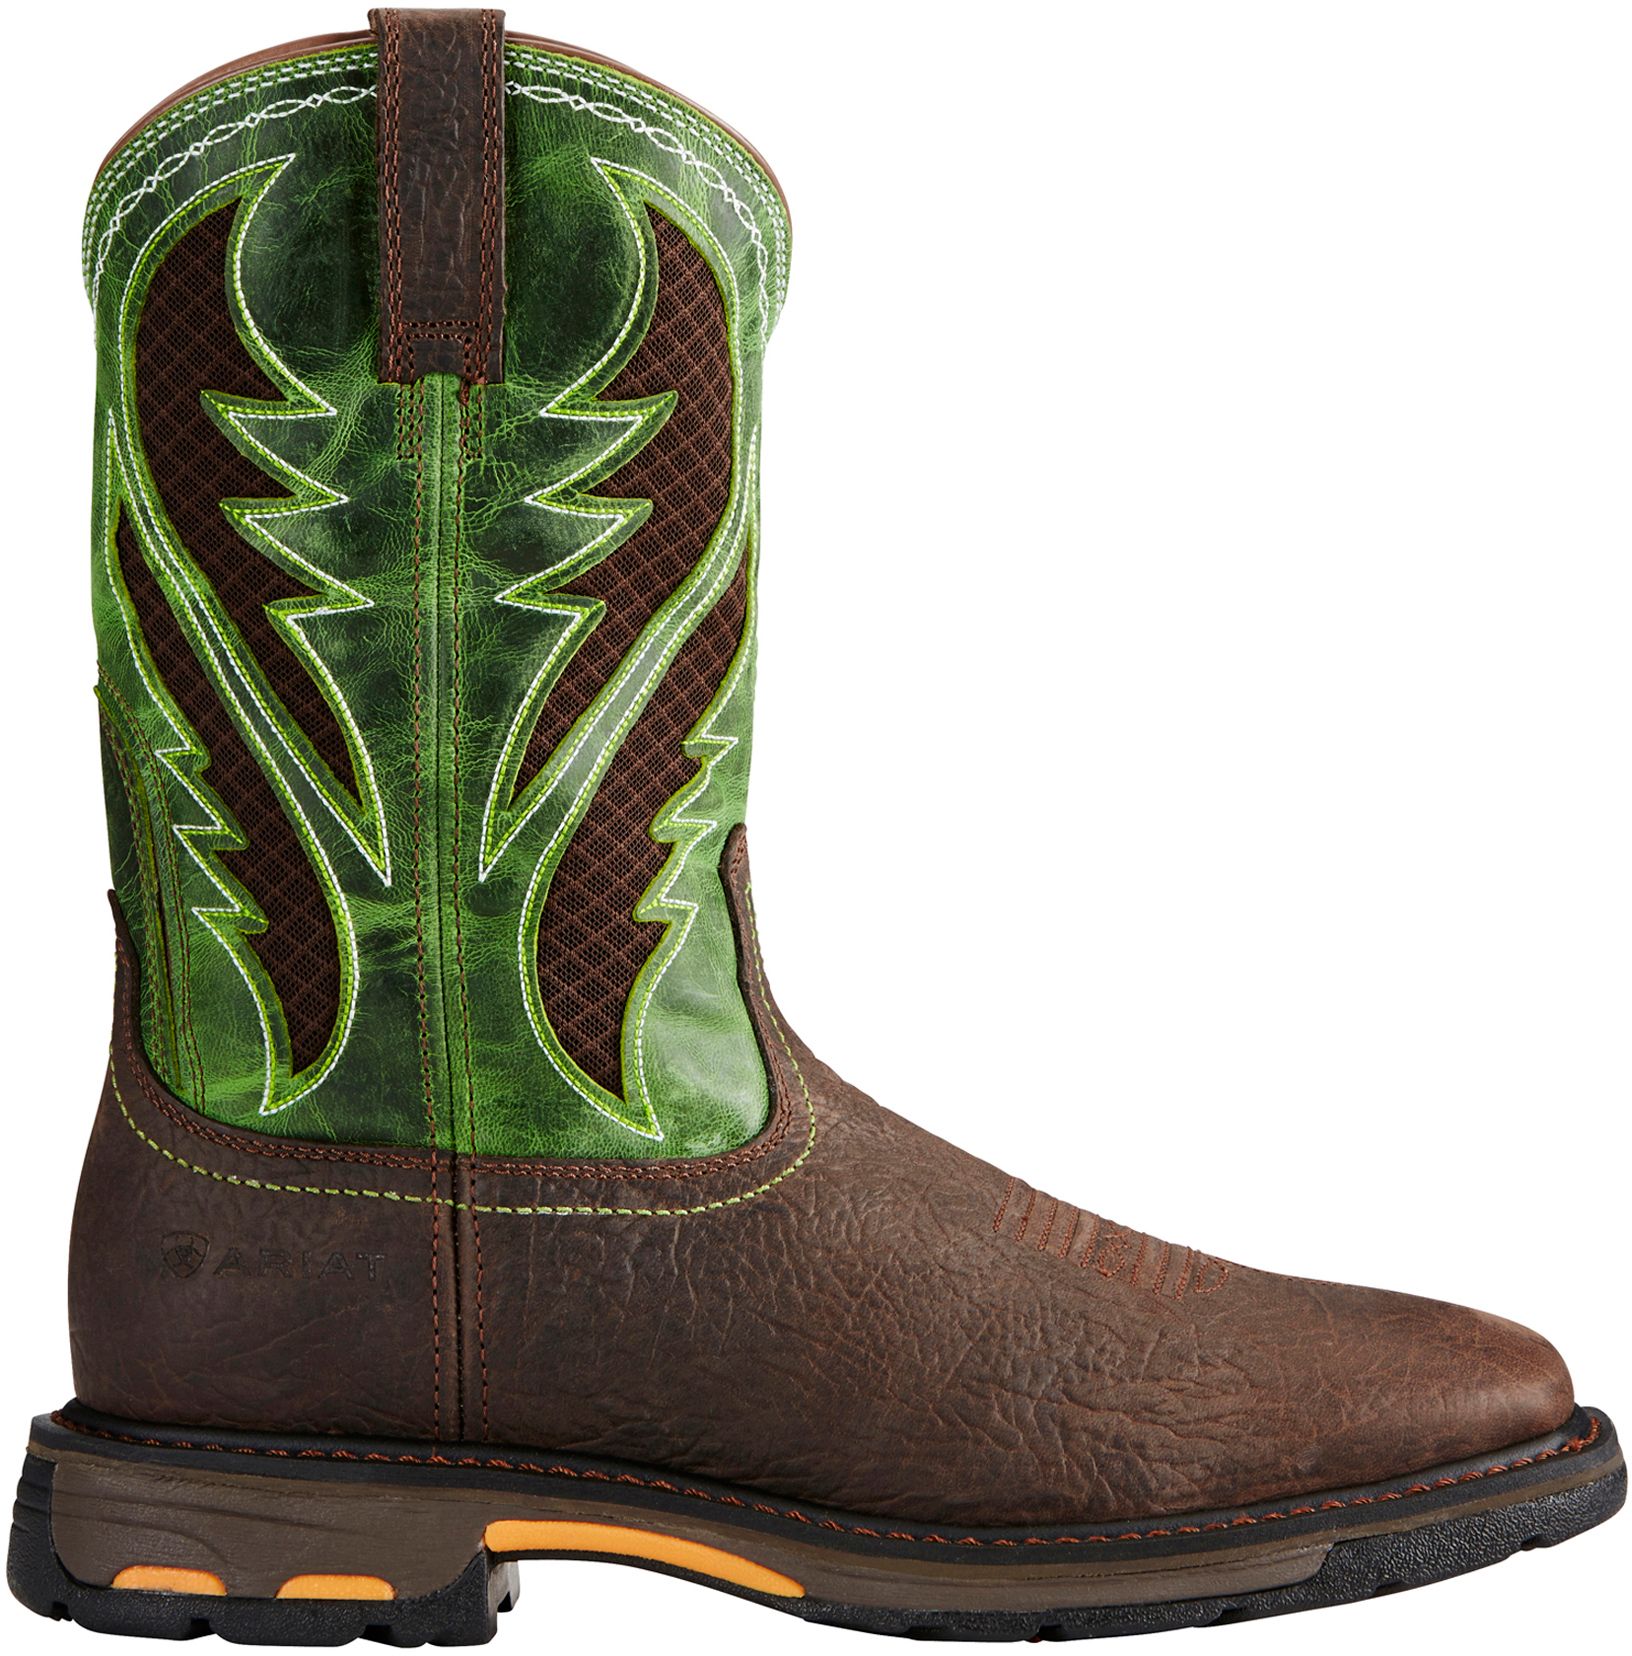 ariat workhog boots review